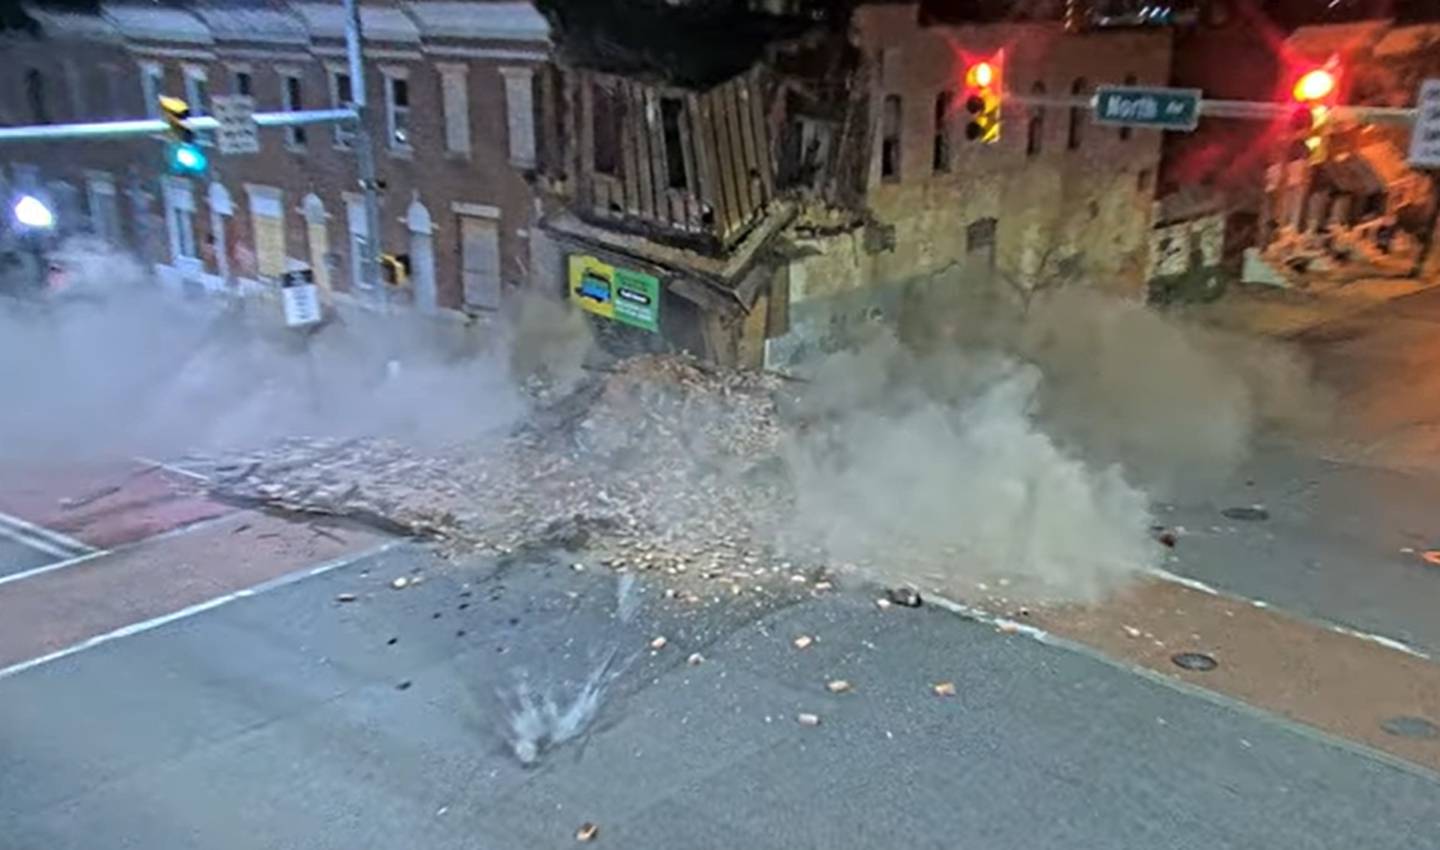 A building at the corner of E. North Avenue and N. Wolfe Street collapses after it's hit by stolen car that crashed into another car. The driver of the stolen vehicle hit a pedestrian, Alfred Fincher, before crashing into the building. Fincher was pronounced dead at the scene.